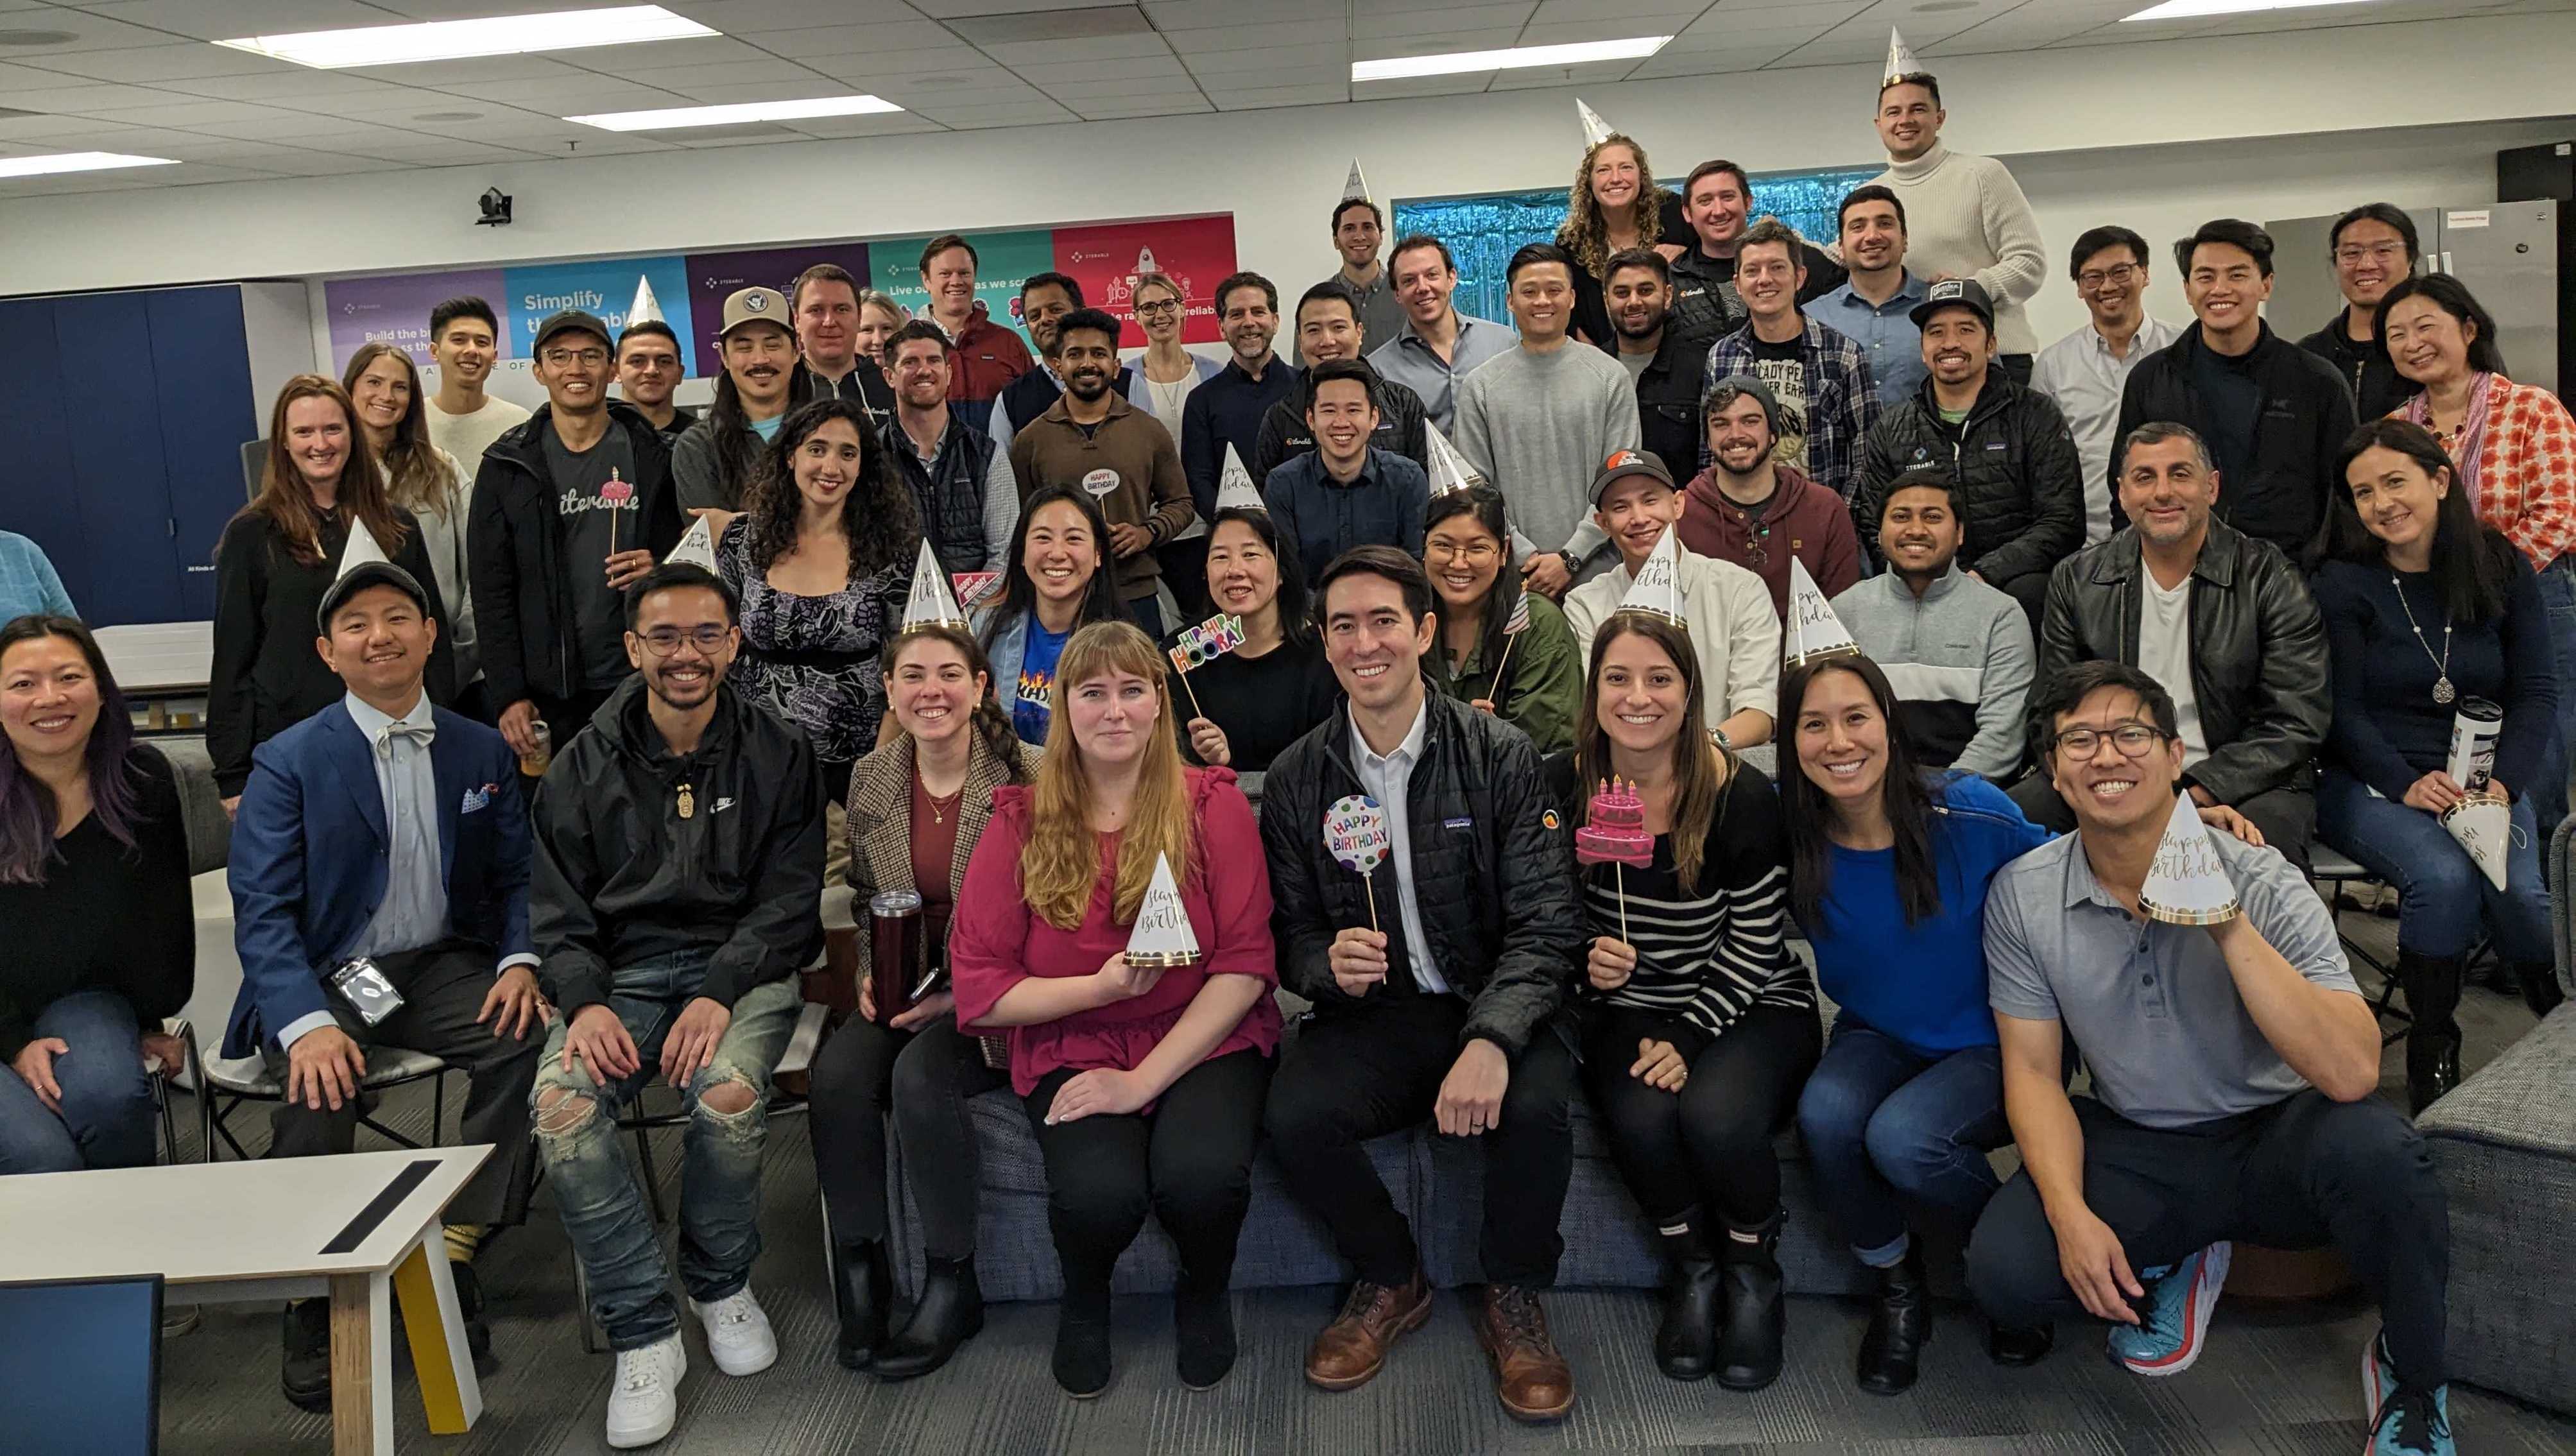 Large group photo of Iterable team members wearing party hats